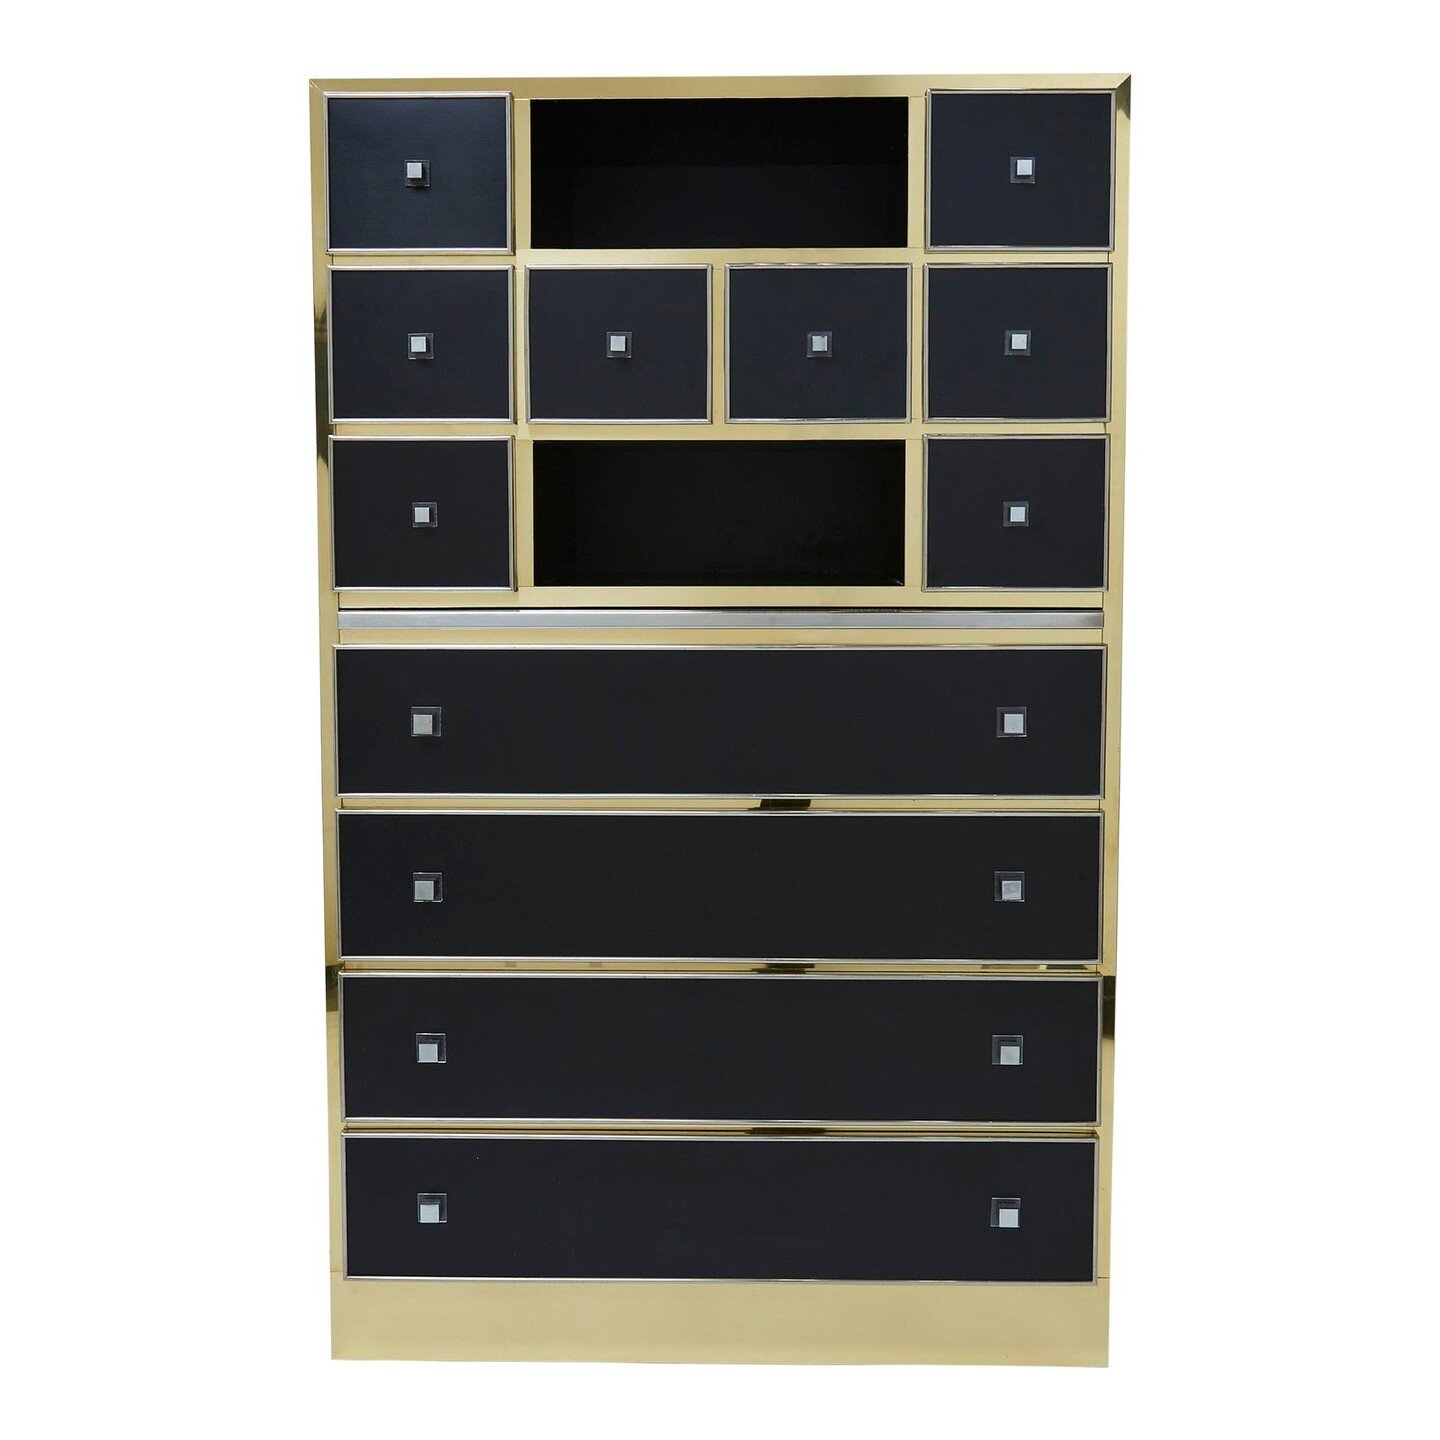 1970s Brass Chrome Black Cabinet Secretaire in the Manner of Michel Pigneres

Unique French mid-century modern cabinet secr&eacute;taire in the Manner of Michel Pigneres. This piece is an exquisite example of refined, highly detailed and very well ma